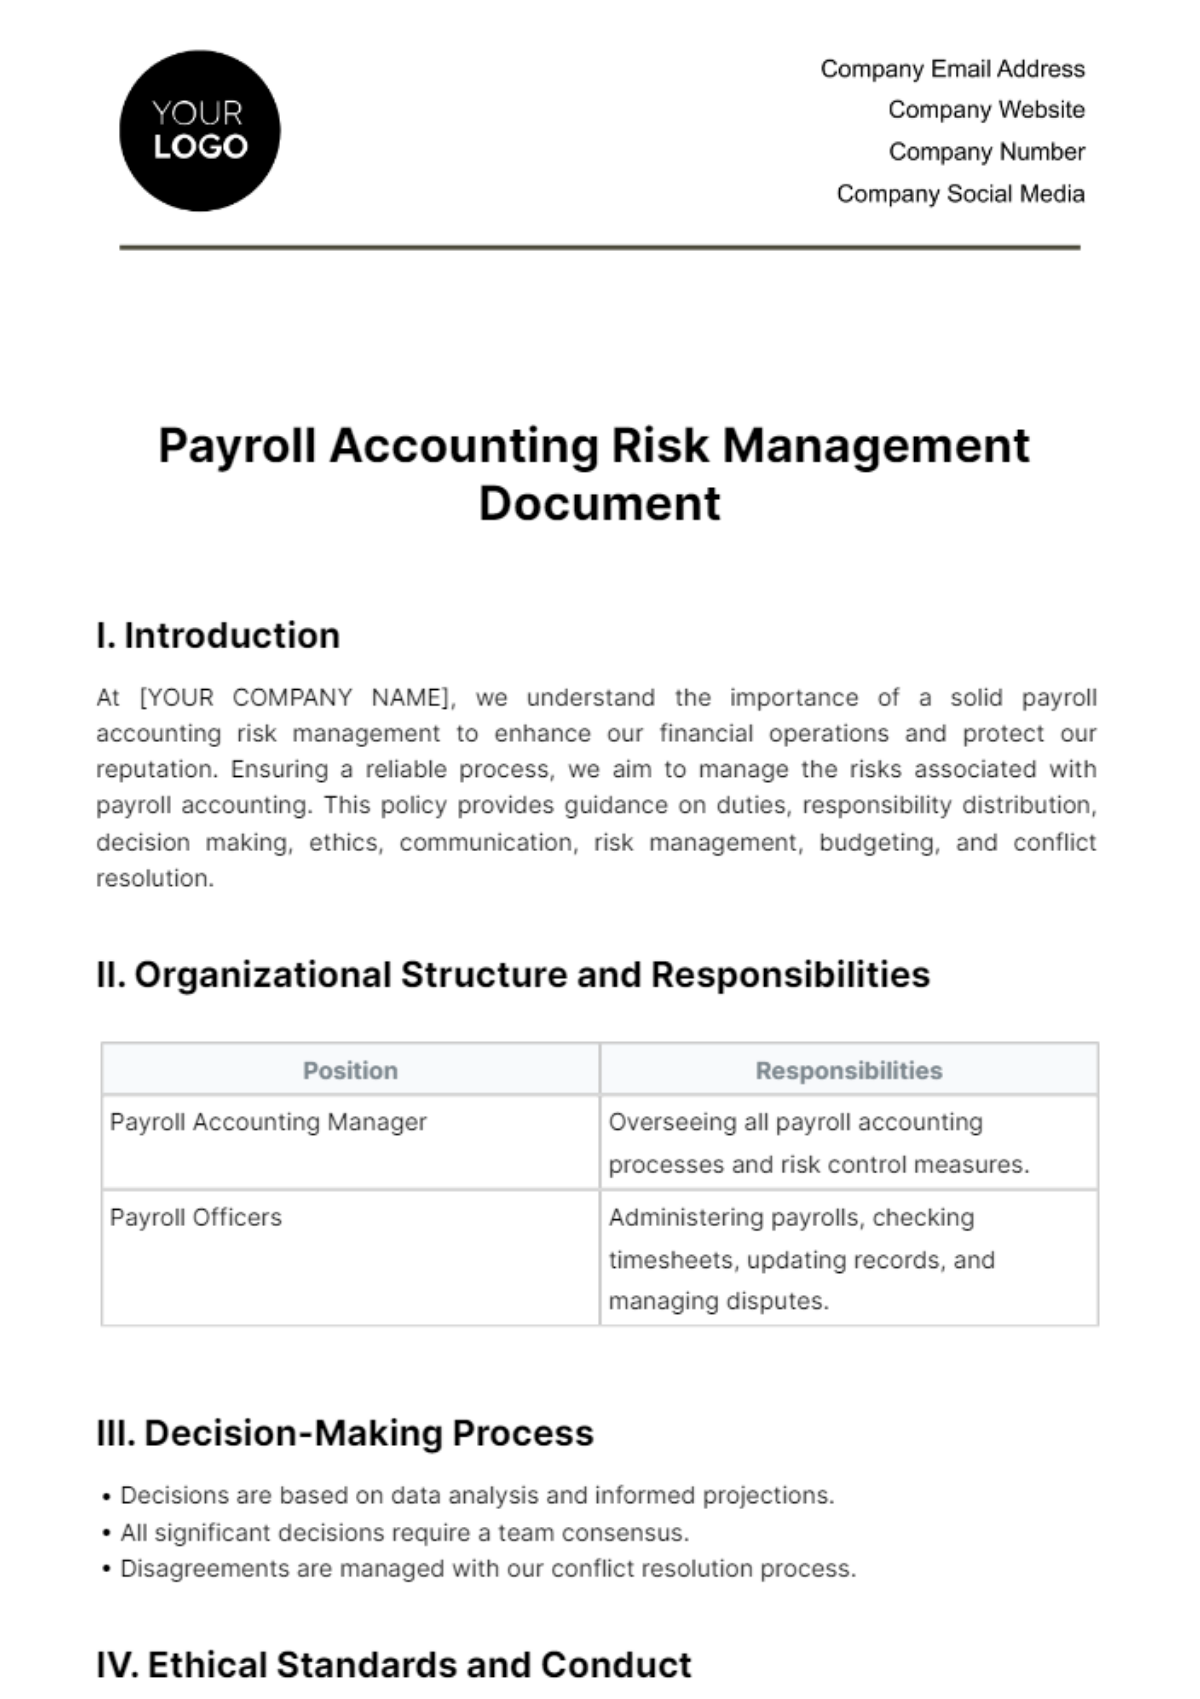 Payroll Accounting Risk Management Document Template